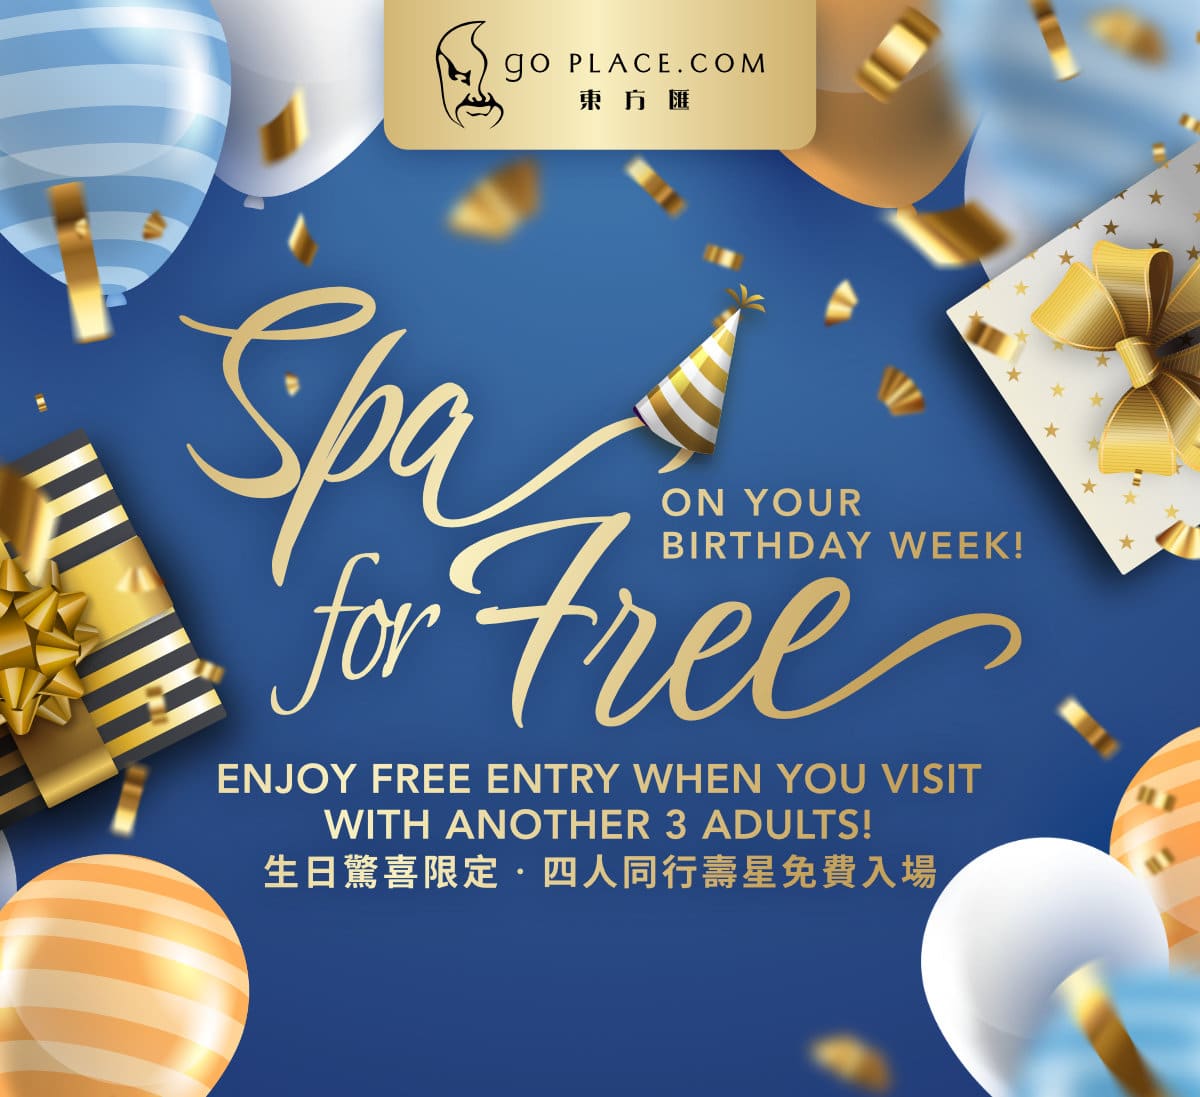 Spa For Free on Your Birthday Month! - Go Place.com 東方匯